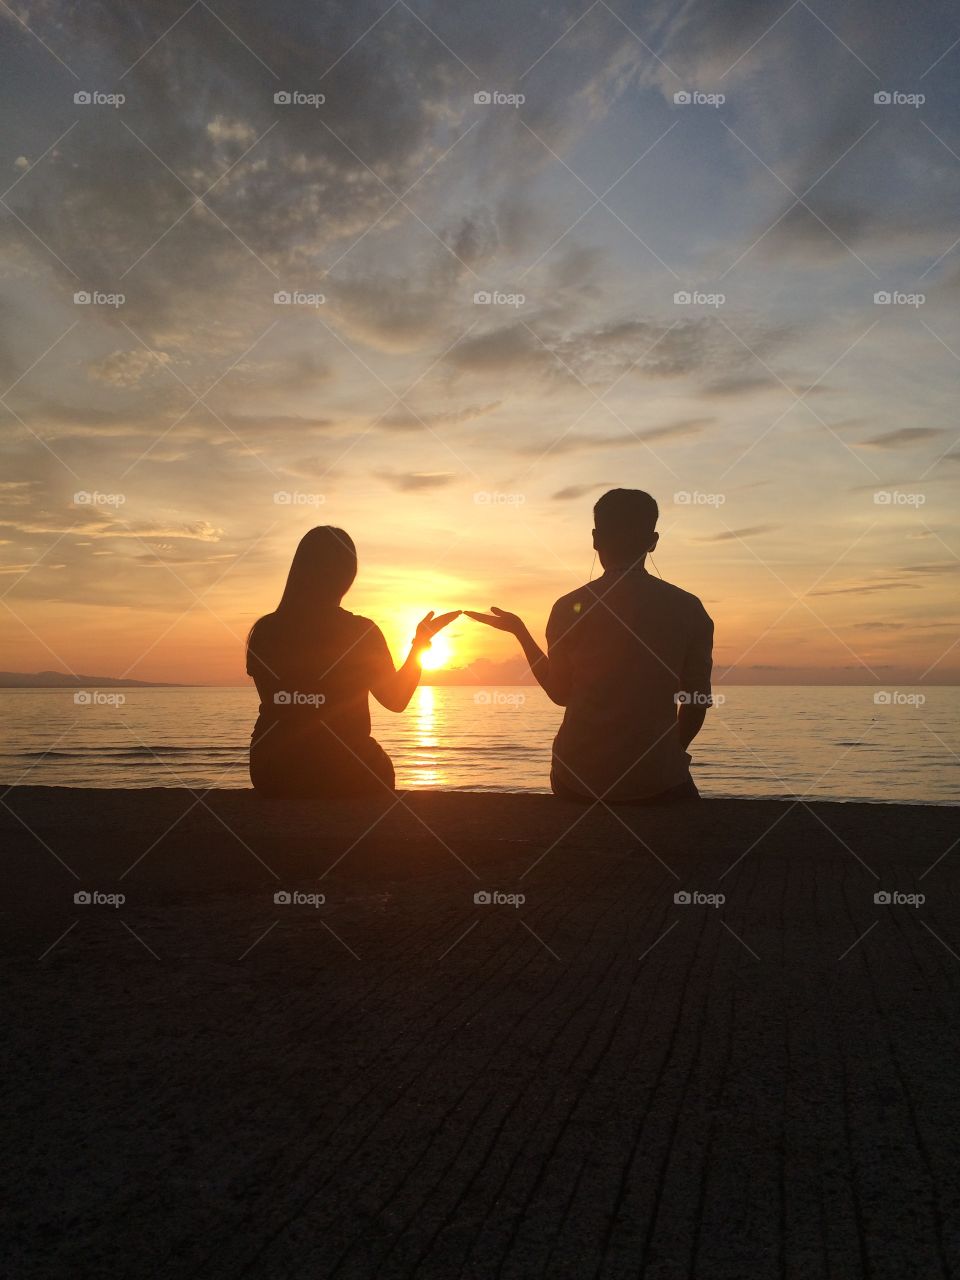 #LoversInTheSunset
Golden sunsets in the east..
The land of Ophir (Philippines)
The Land of Promise!